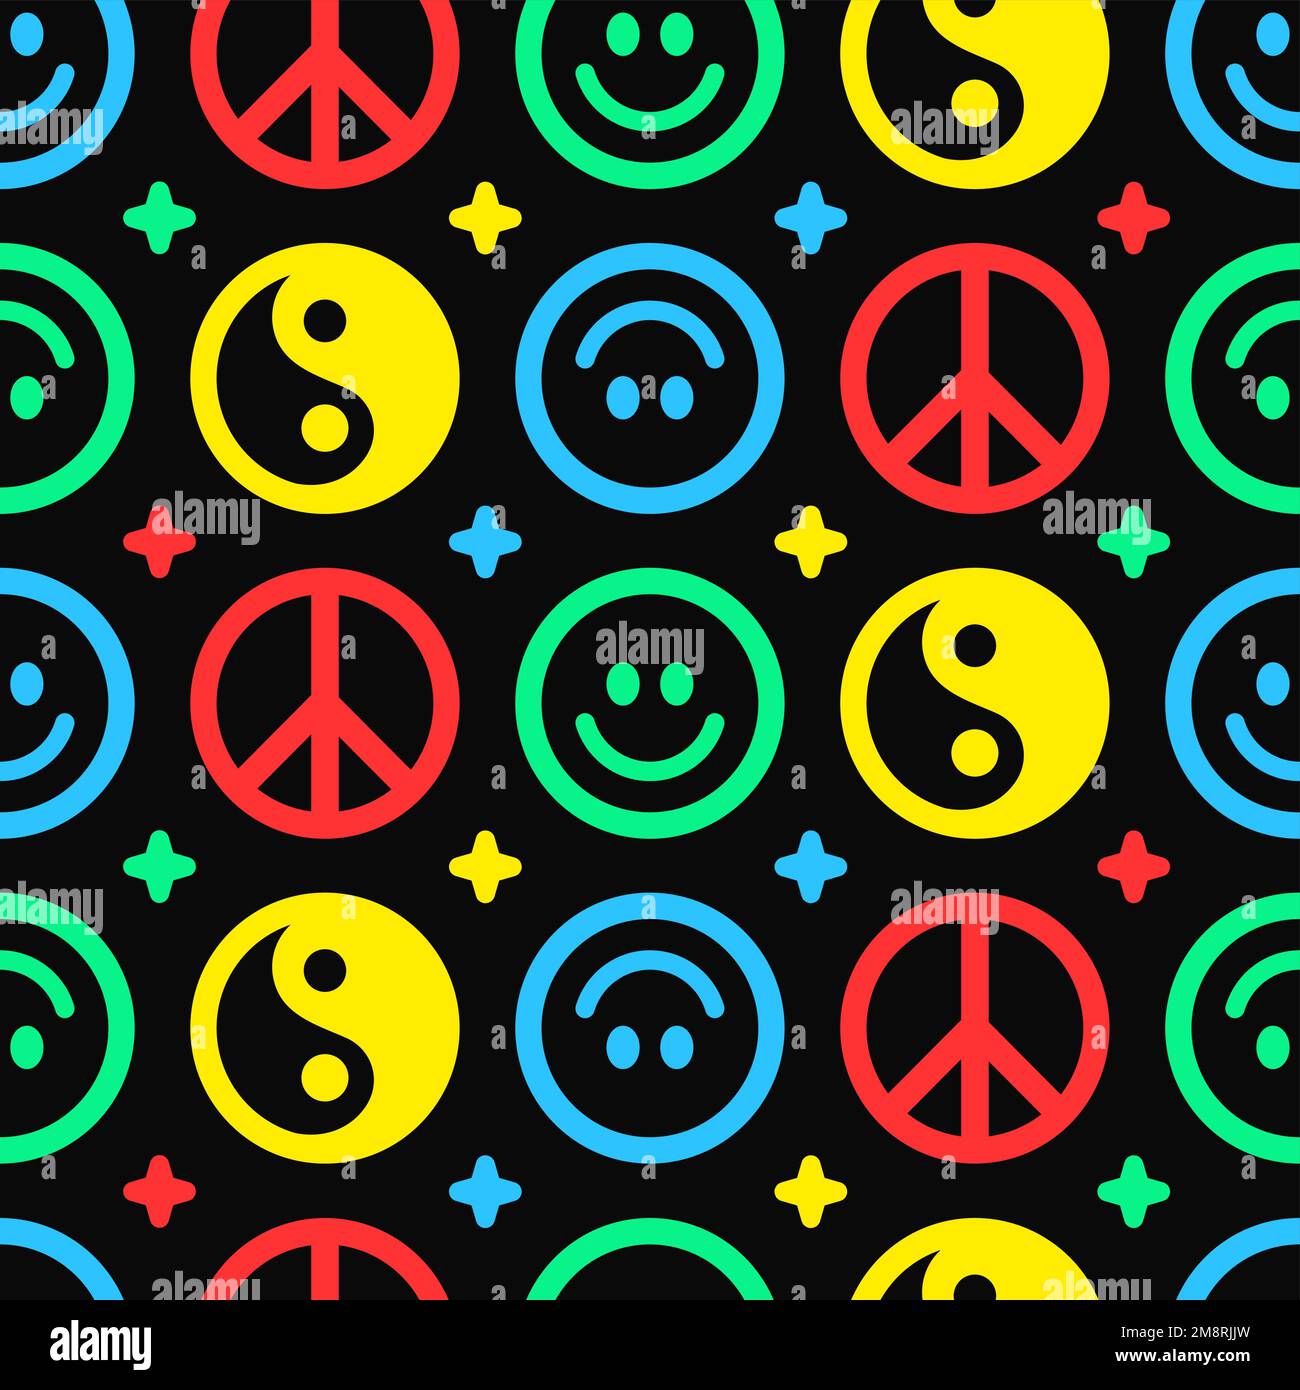 Yin Yang,peace hippie sign,smile face seamless pattern.Vector hand drawn cartoon character illustration.Yin Yang,ying,smile face,acid,love hippie peace symbol seamless pattern wallpaper print Stock Vector